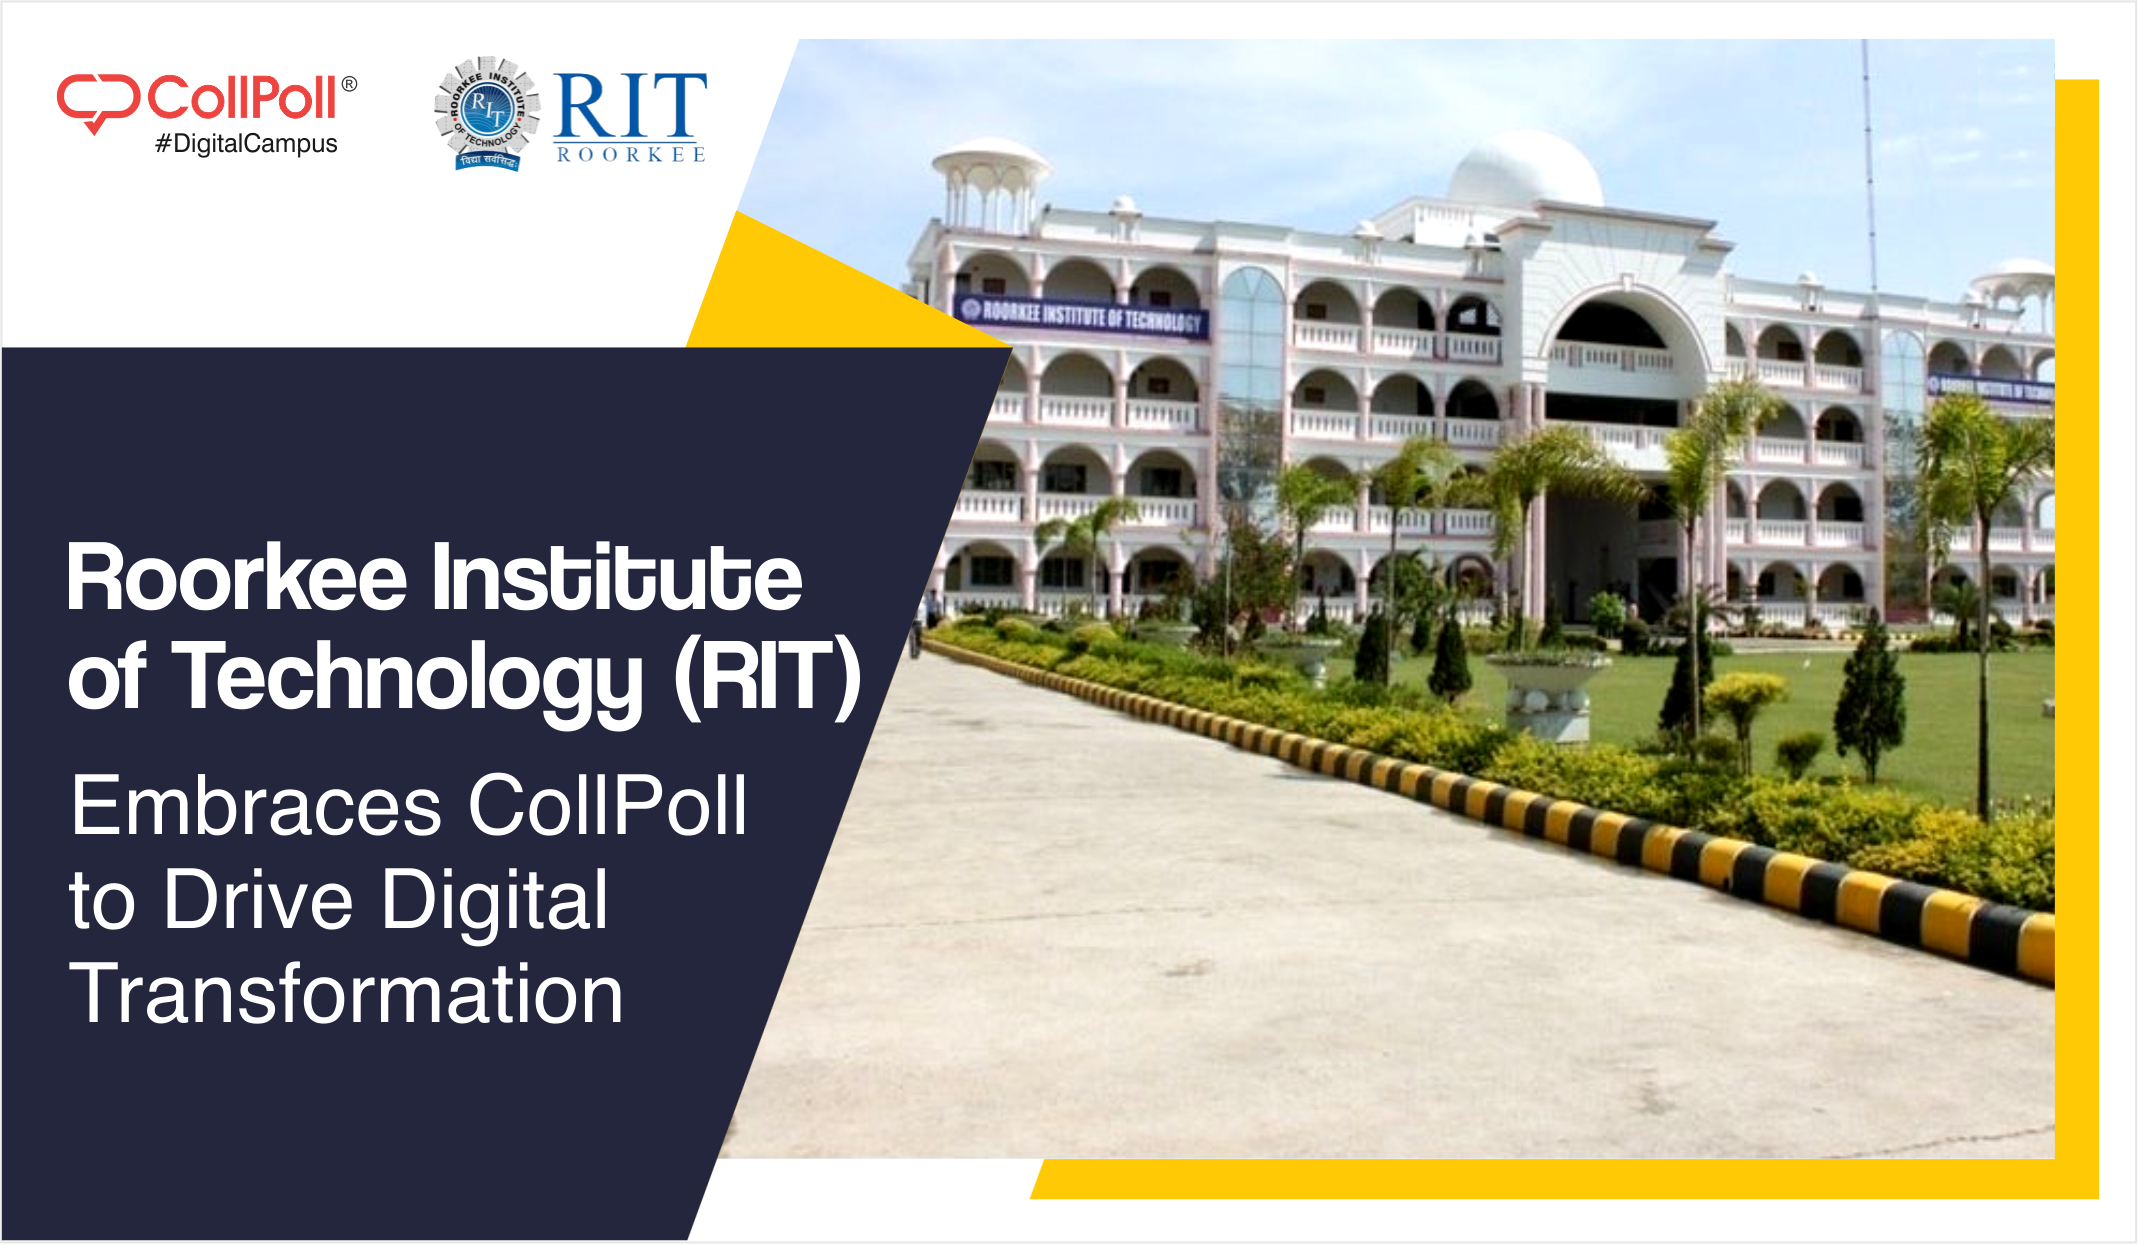 Roorkee Institute of Technology (RIT) Embraces CollPoll to Drive Digital Transformation